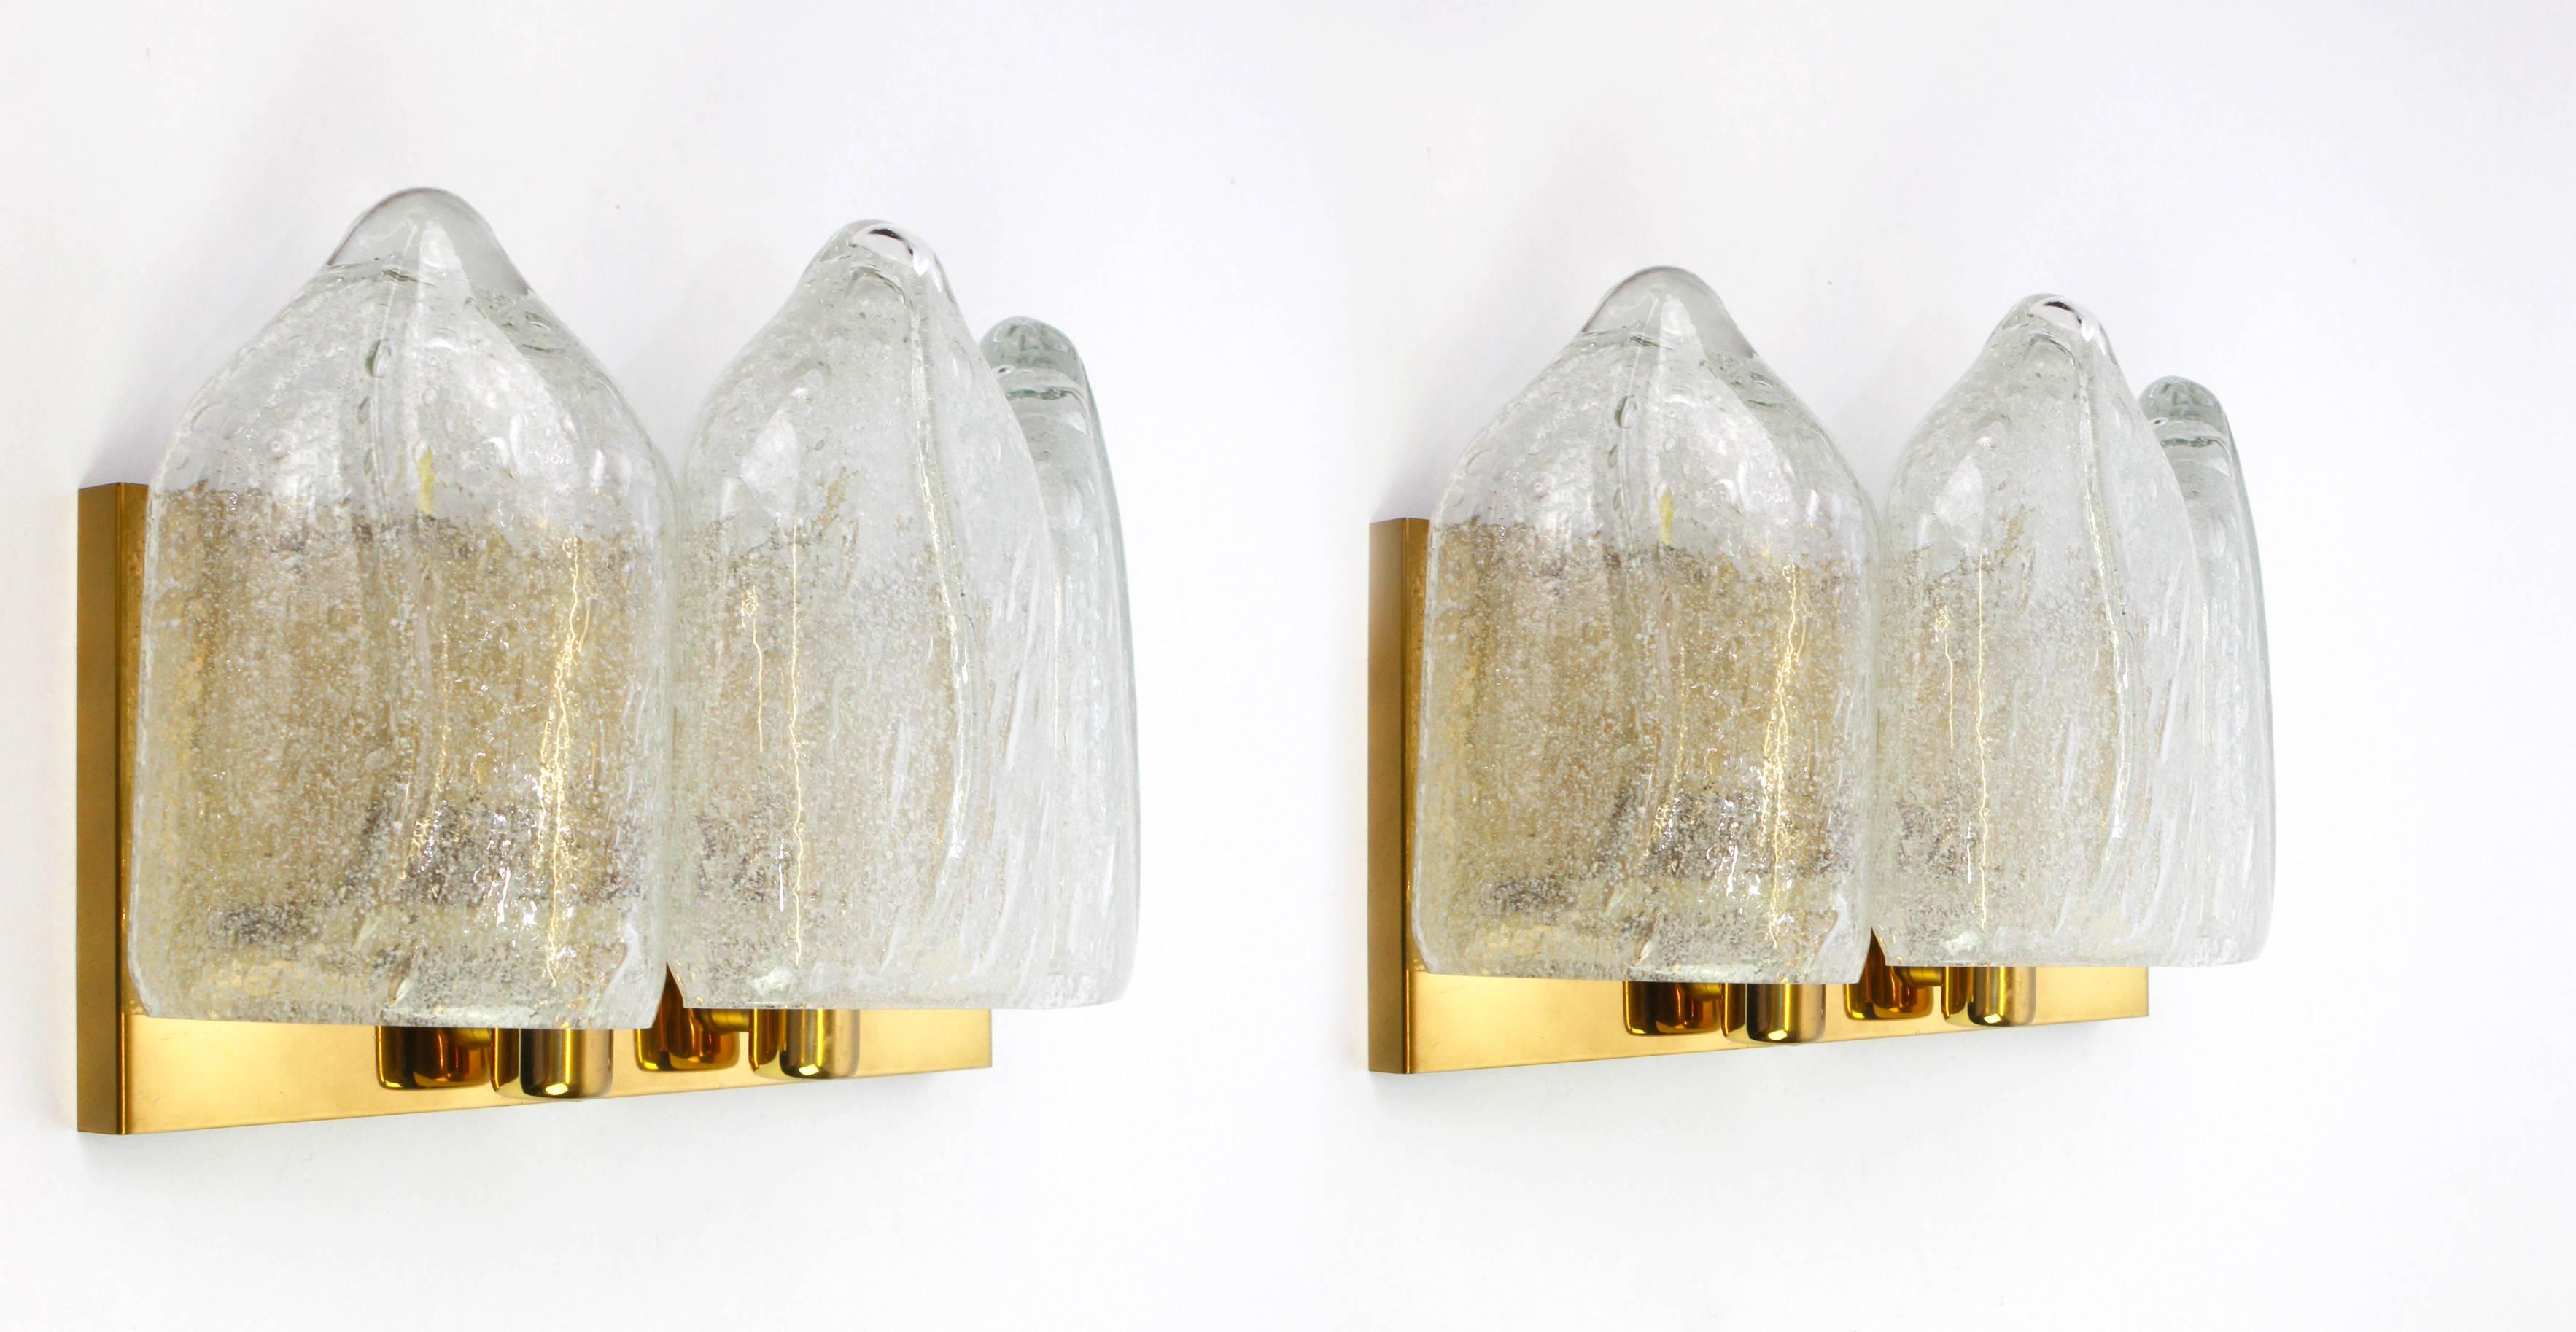 Wonderful pair of Mid-Century wall sconces with ice glass tubes, made by Doria Leuchten, Germany, manufactured, circa 1960-1969.

Each wall sconce needs two small Edison balls ( E-14) up to 40 watts each and function on voltage from 110 till 240